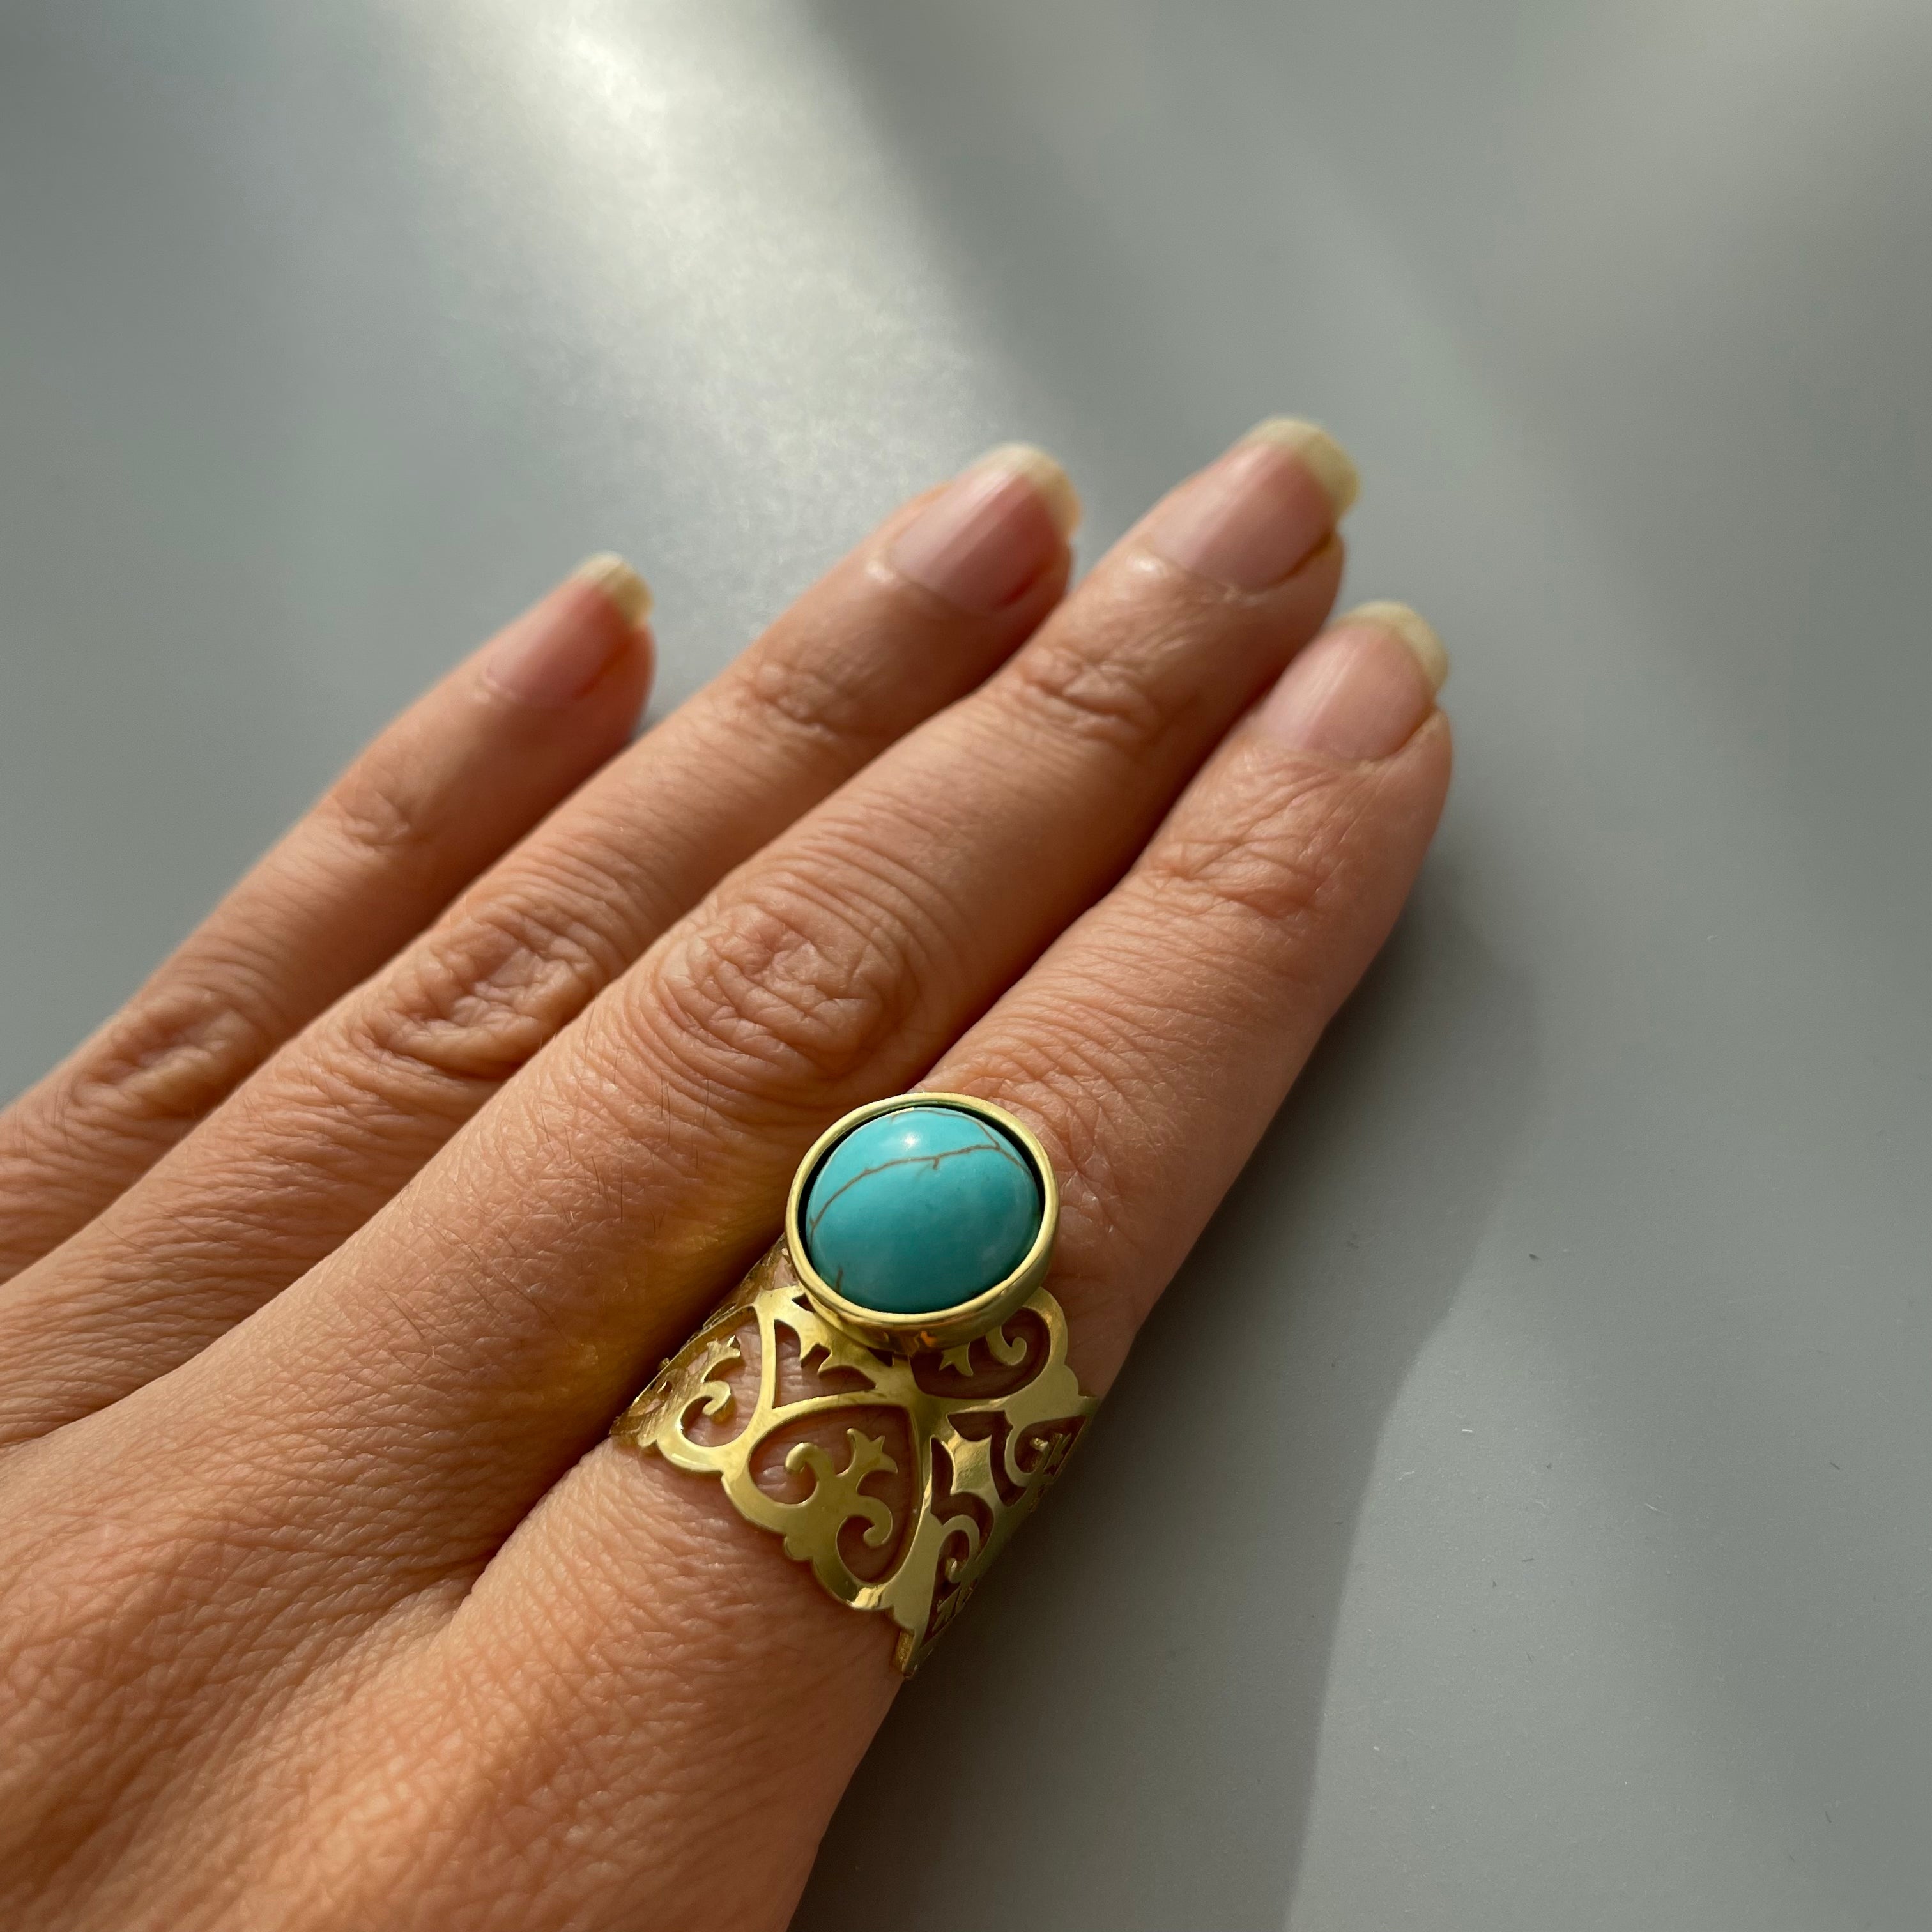 Persian Ring-Handmade Persian Ring with Turquoise:Persian Jewelry-AFRA ART GALLERY